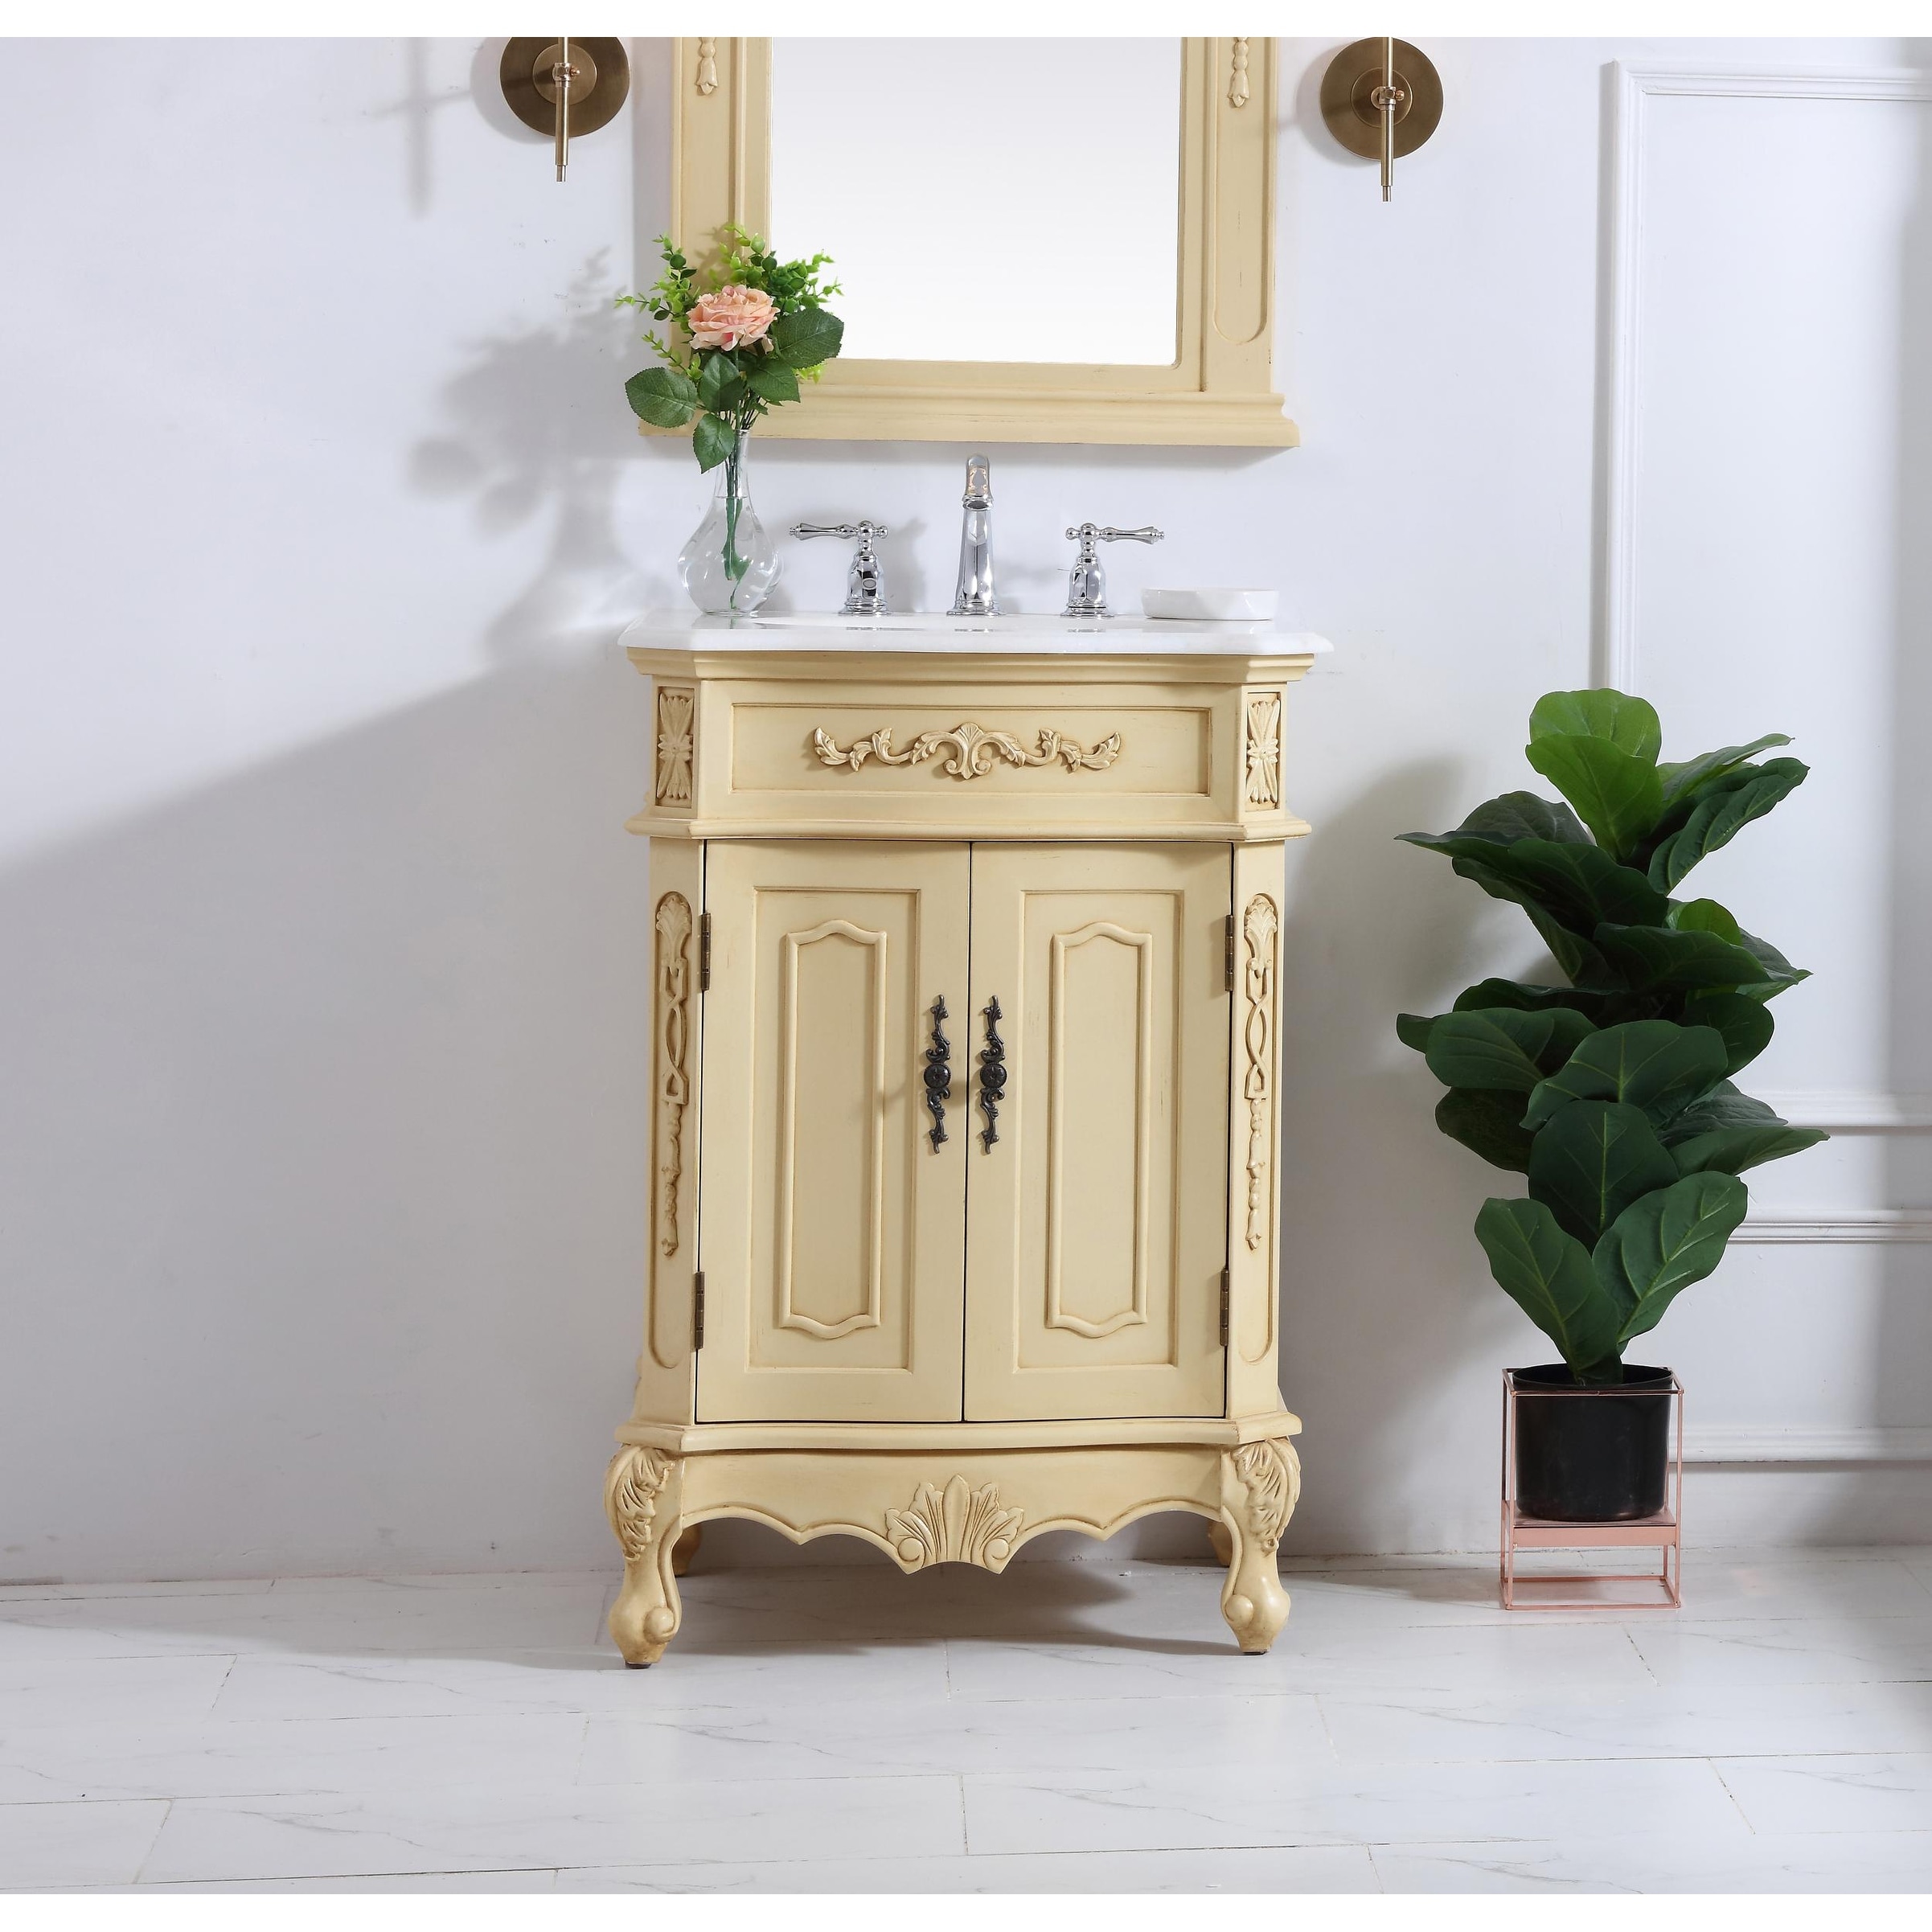 Dallas 24 In Single Bathroom Vanity Set With Marble Top Overstock 31301727 Antique White